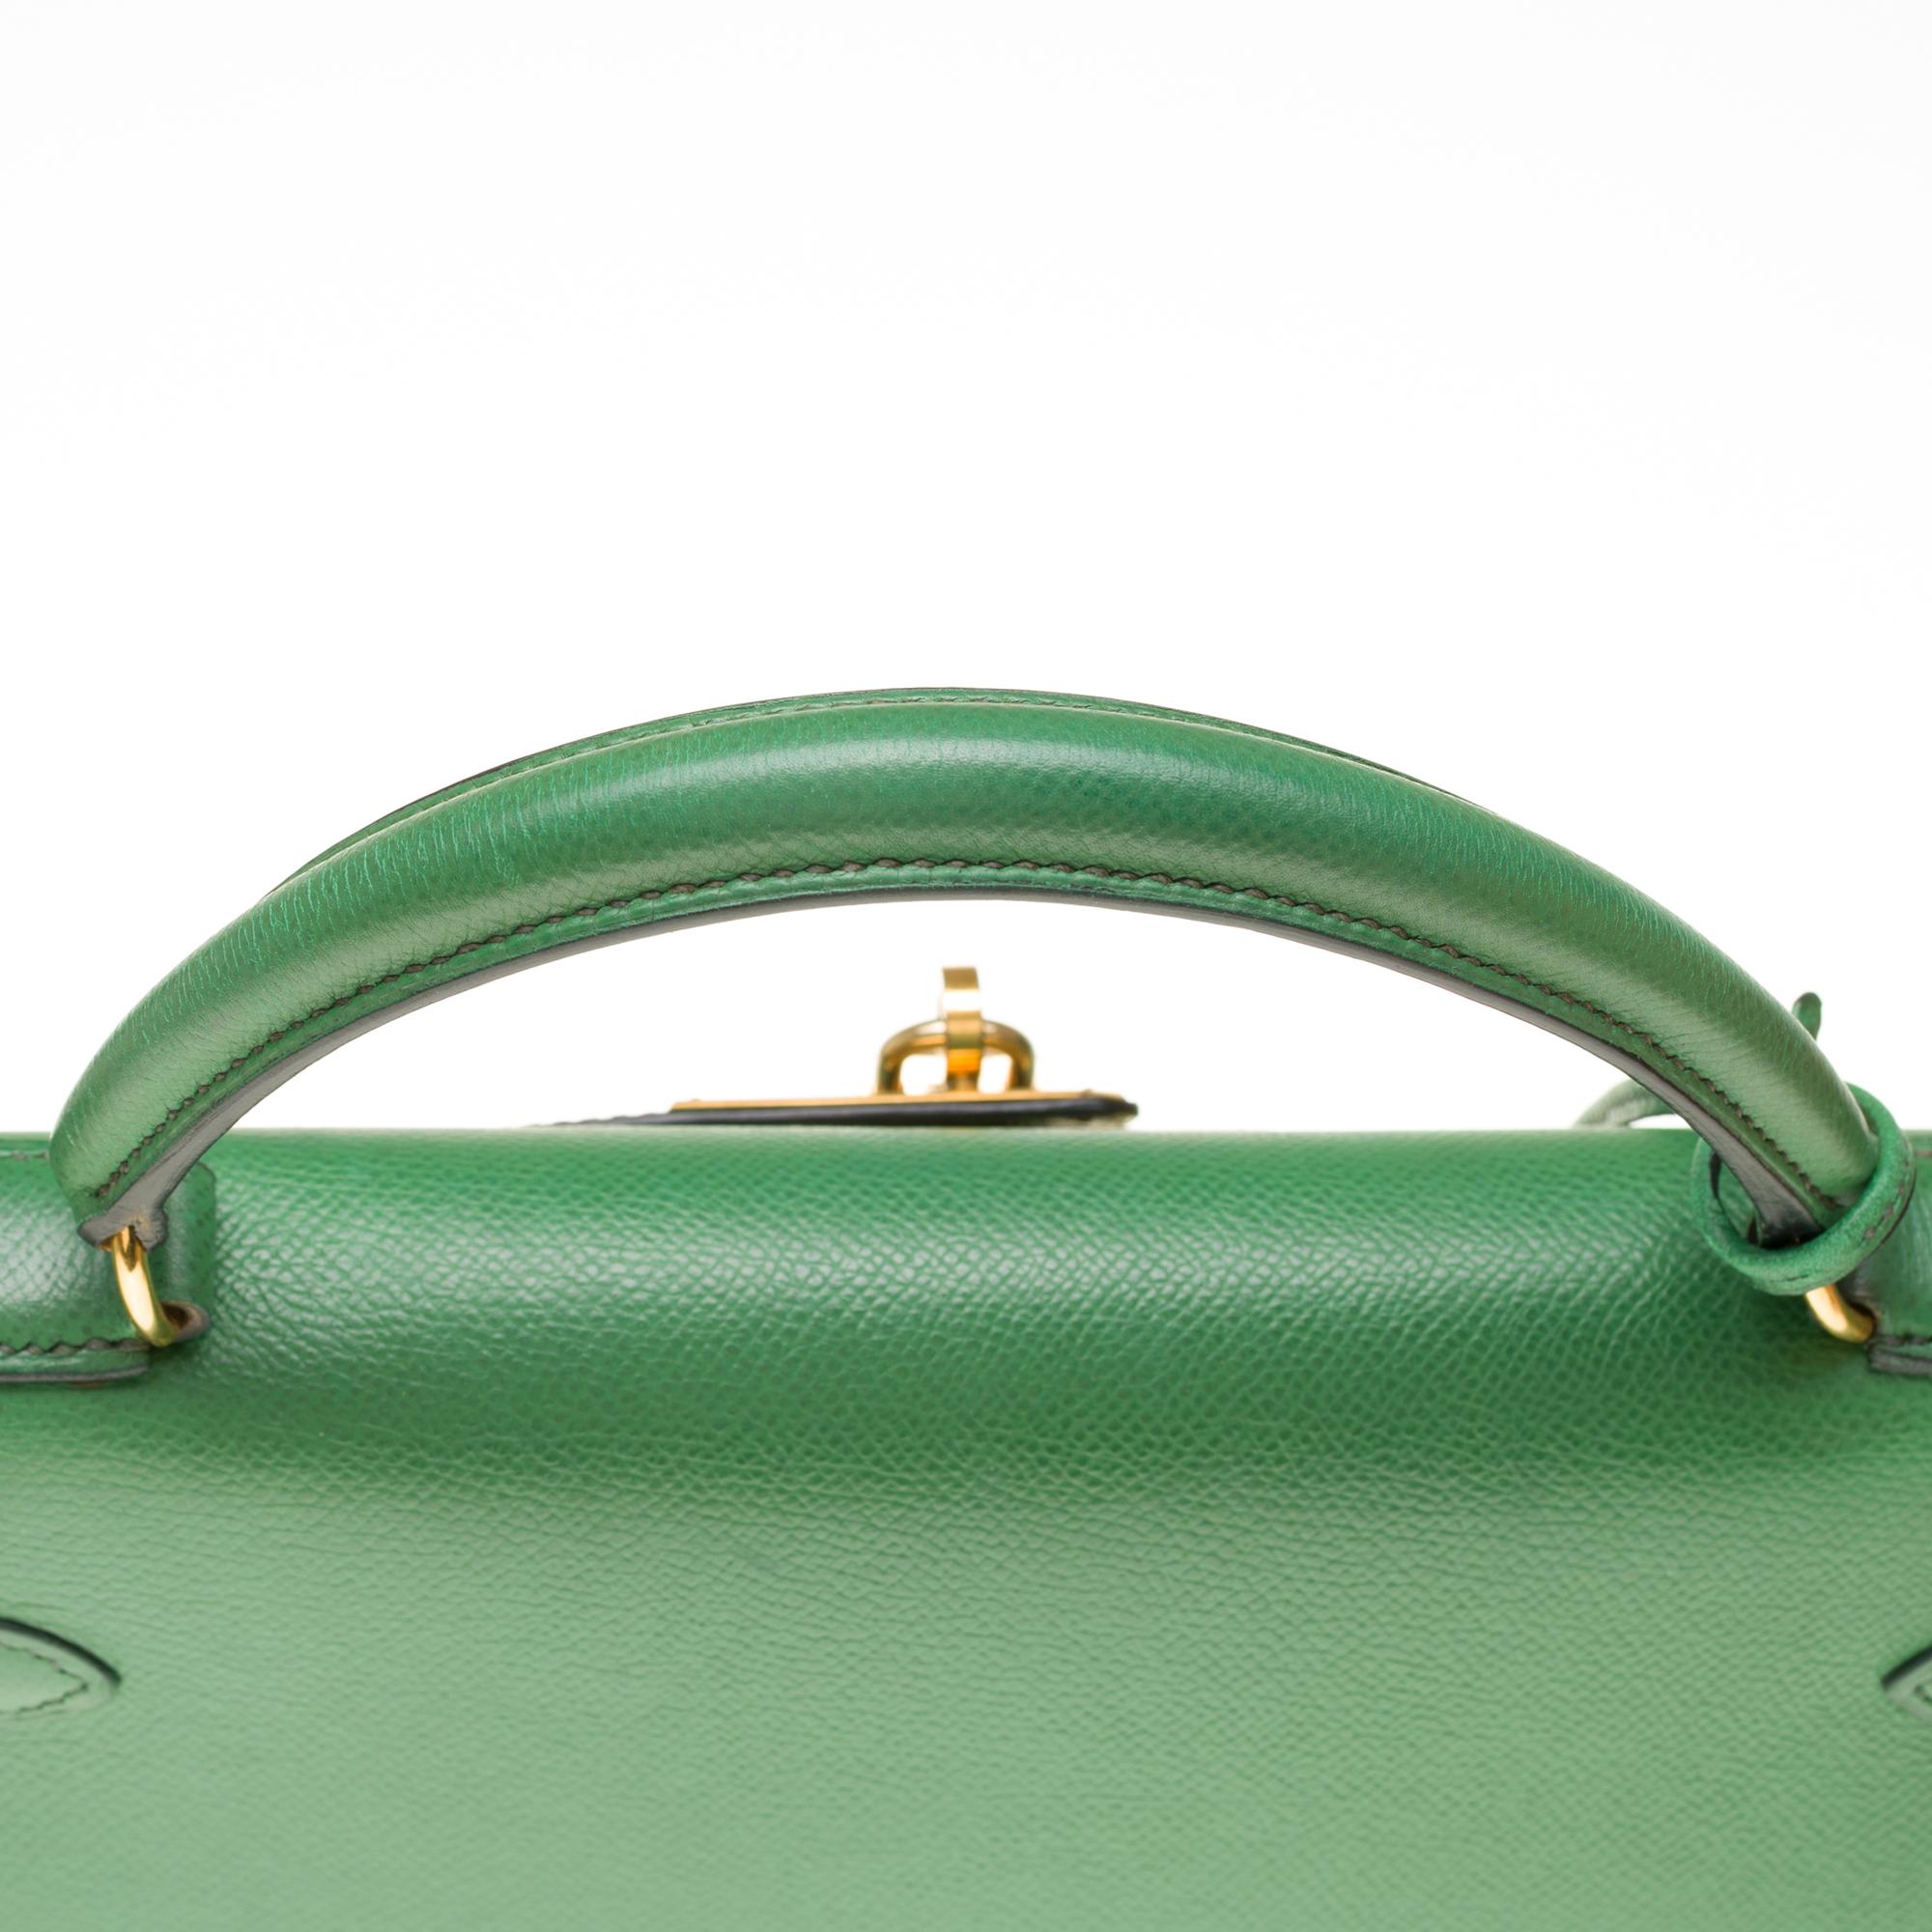 Women's RARE Hermès Kelly 32 sellier handbag with strap in green courchevel and GHW